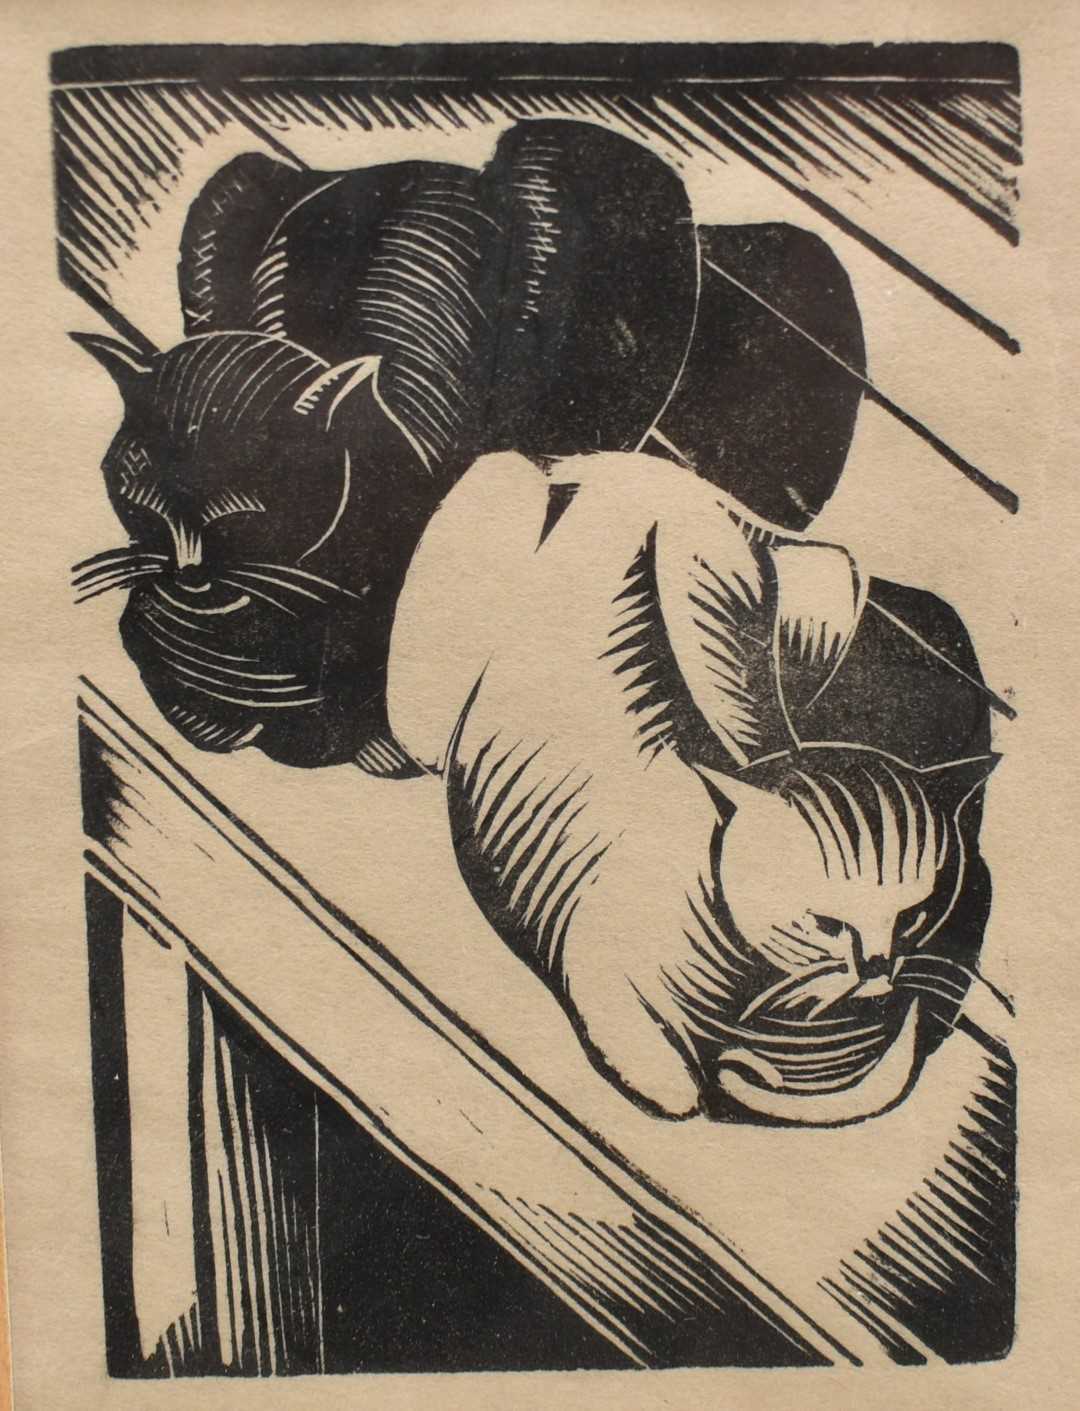 *John Nash (1893-1977) woodcut - Tibby and Patch, c.1919, stamped verso with Studio Stamp, 10cm x 7.